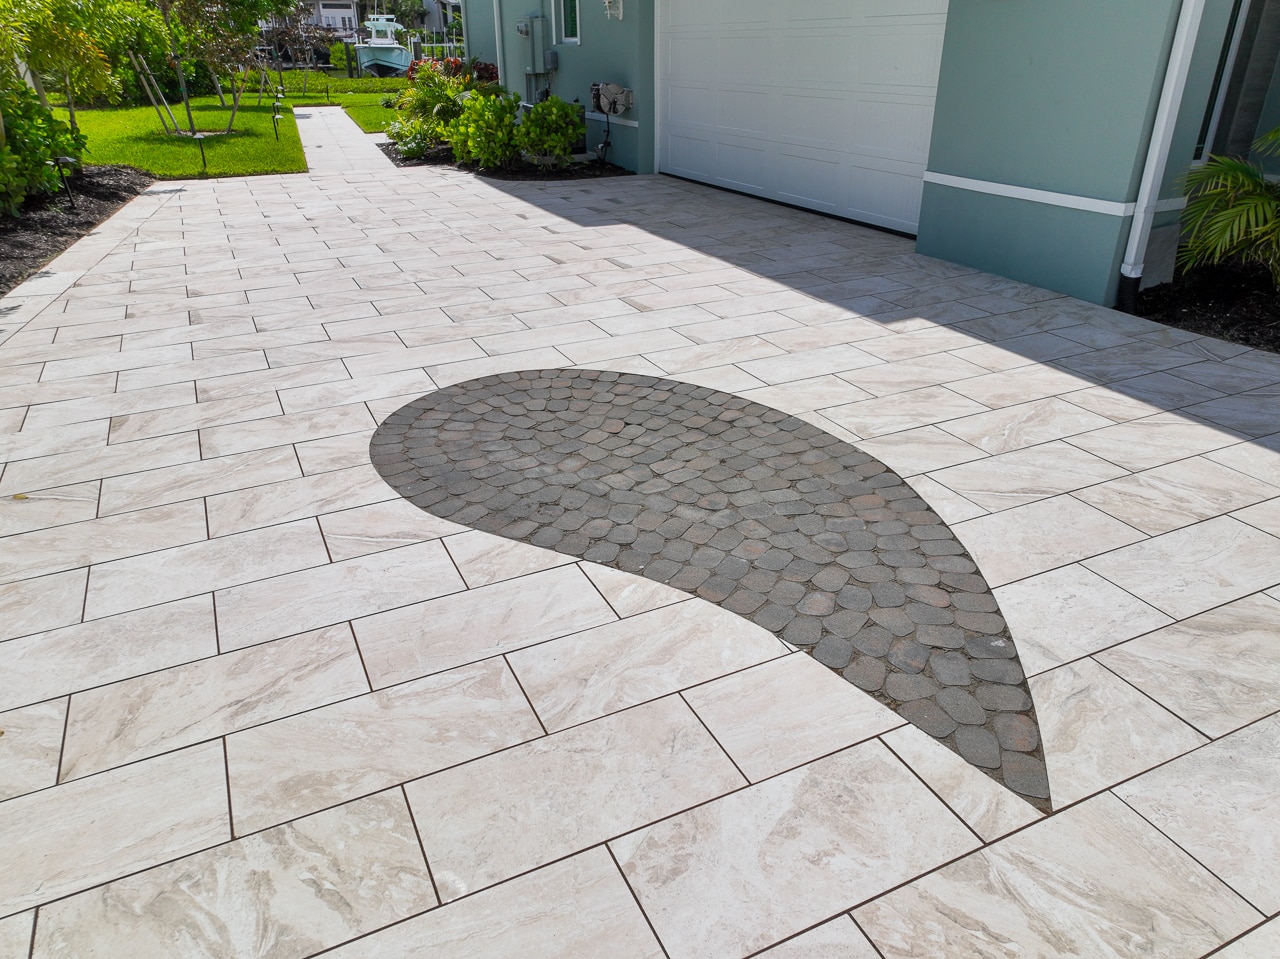 Driveways with endless design options